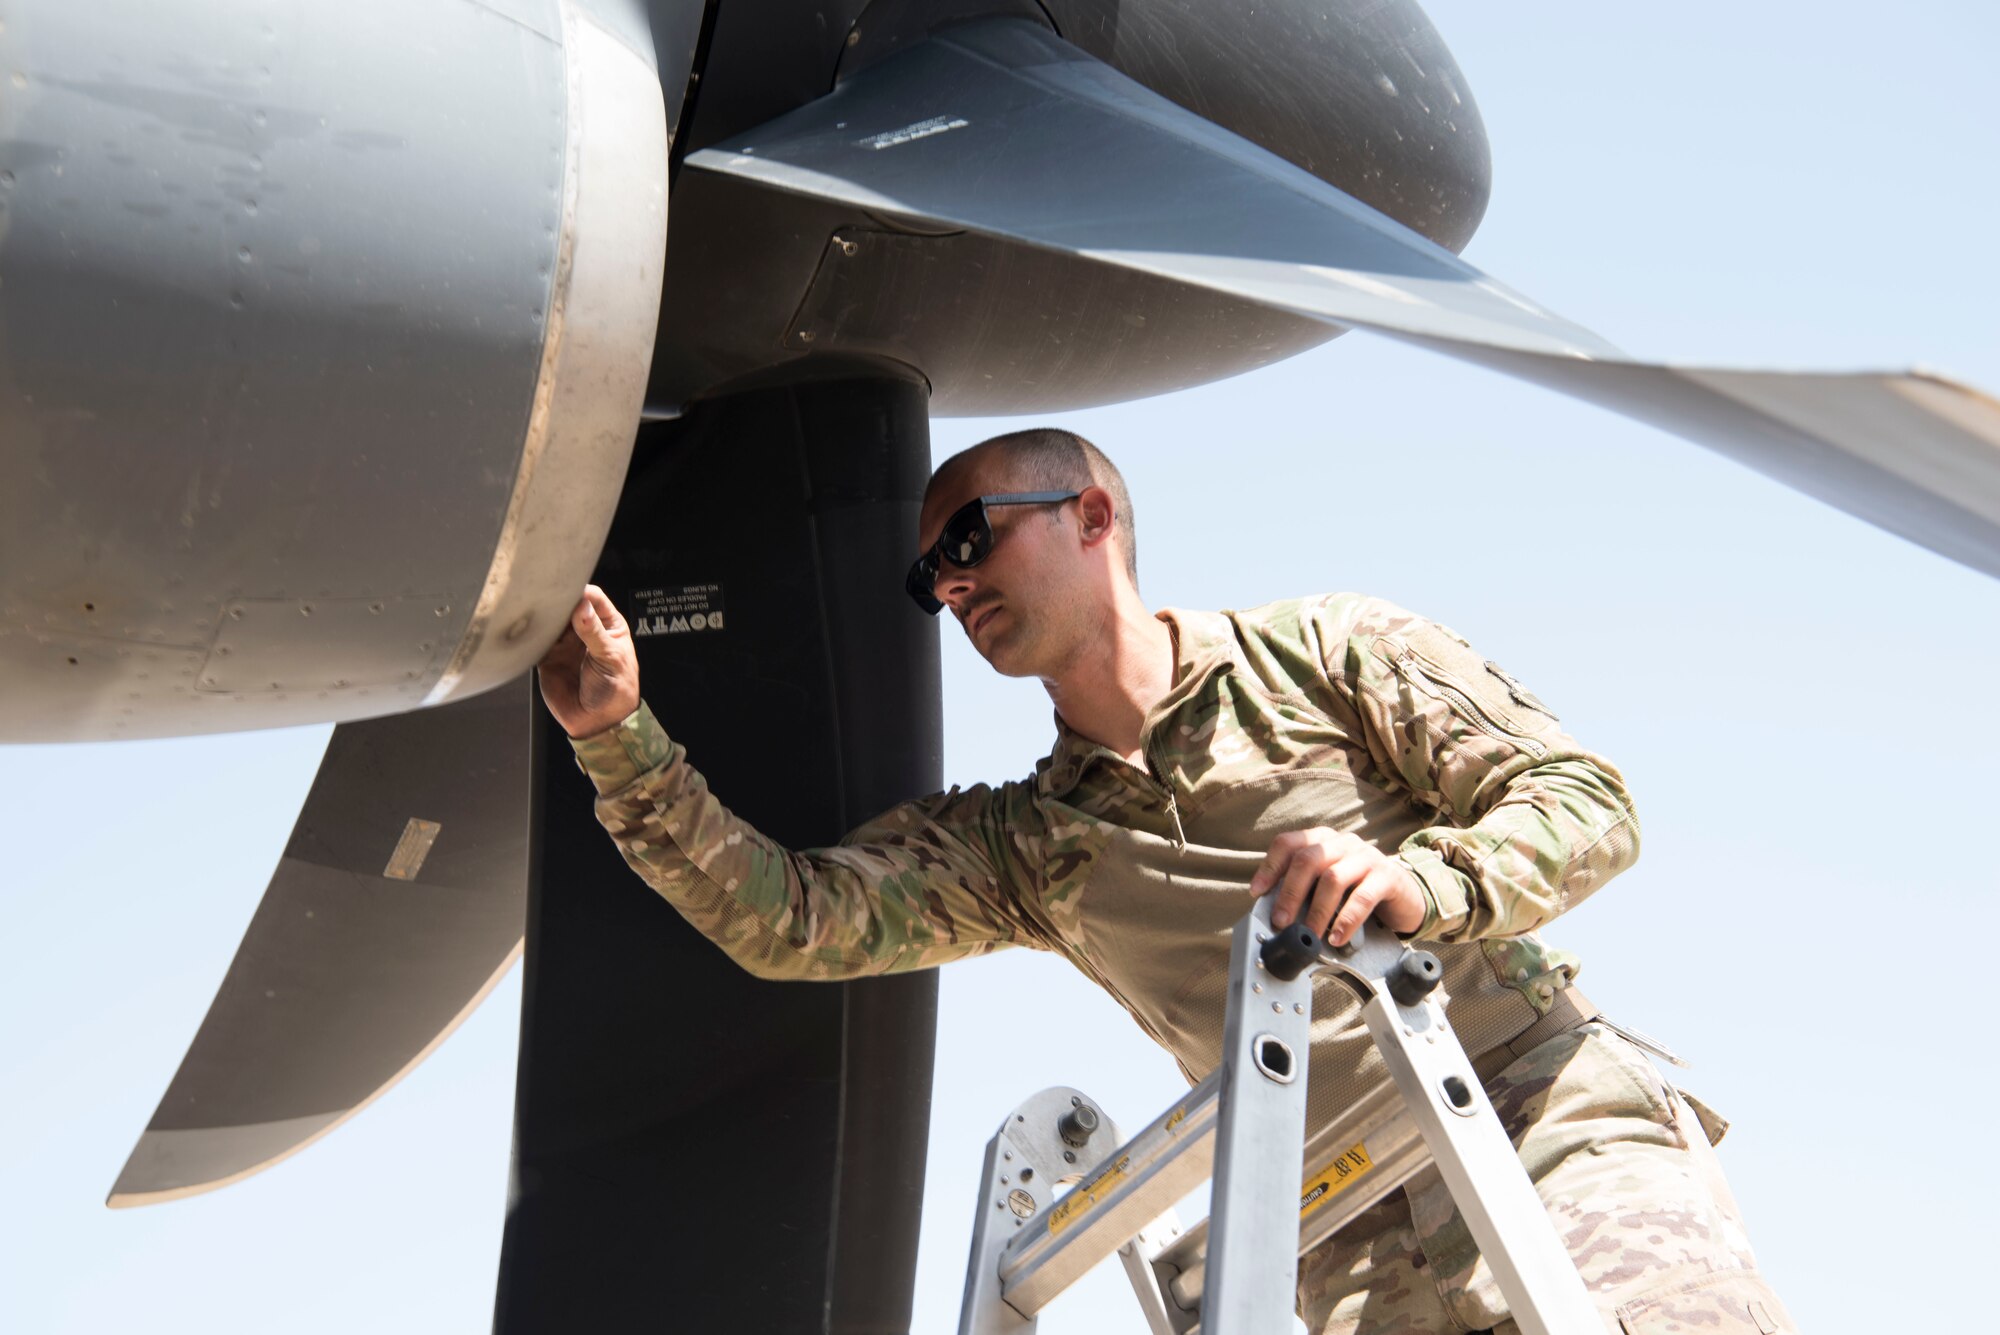 An Airman with the 801st Expeditionary Maintenance Squadron performs post-flight checks and maintenance on a C-130 Hercules, July 4, 2018, at Al Asad Air Base, Iraq.